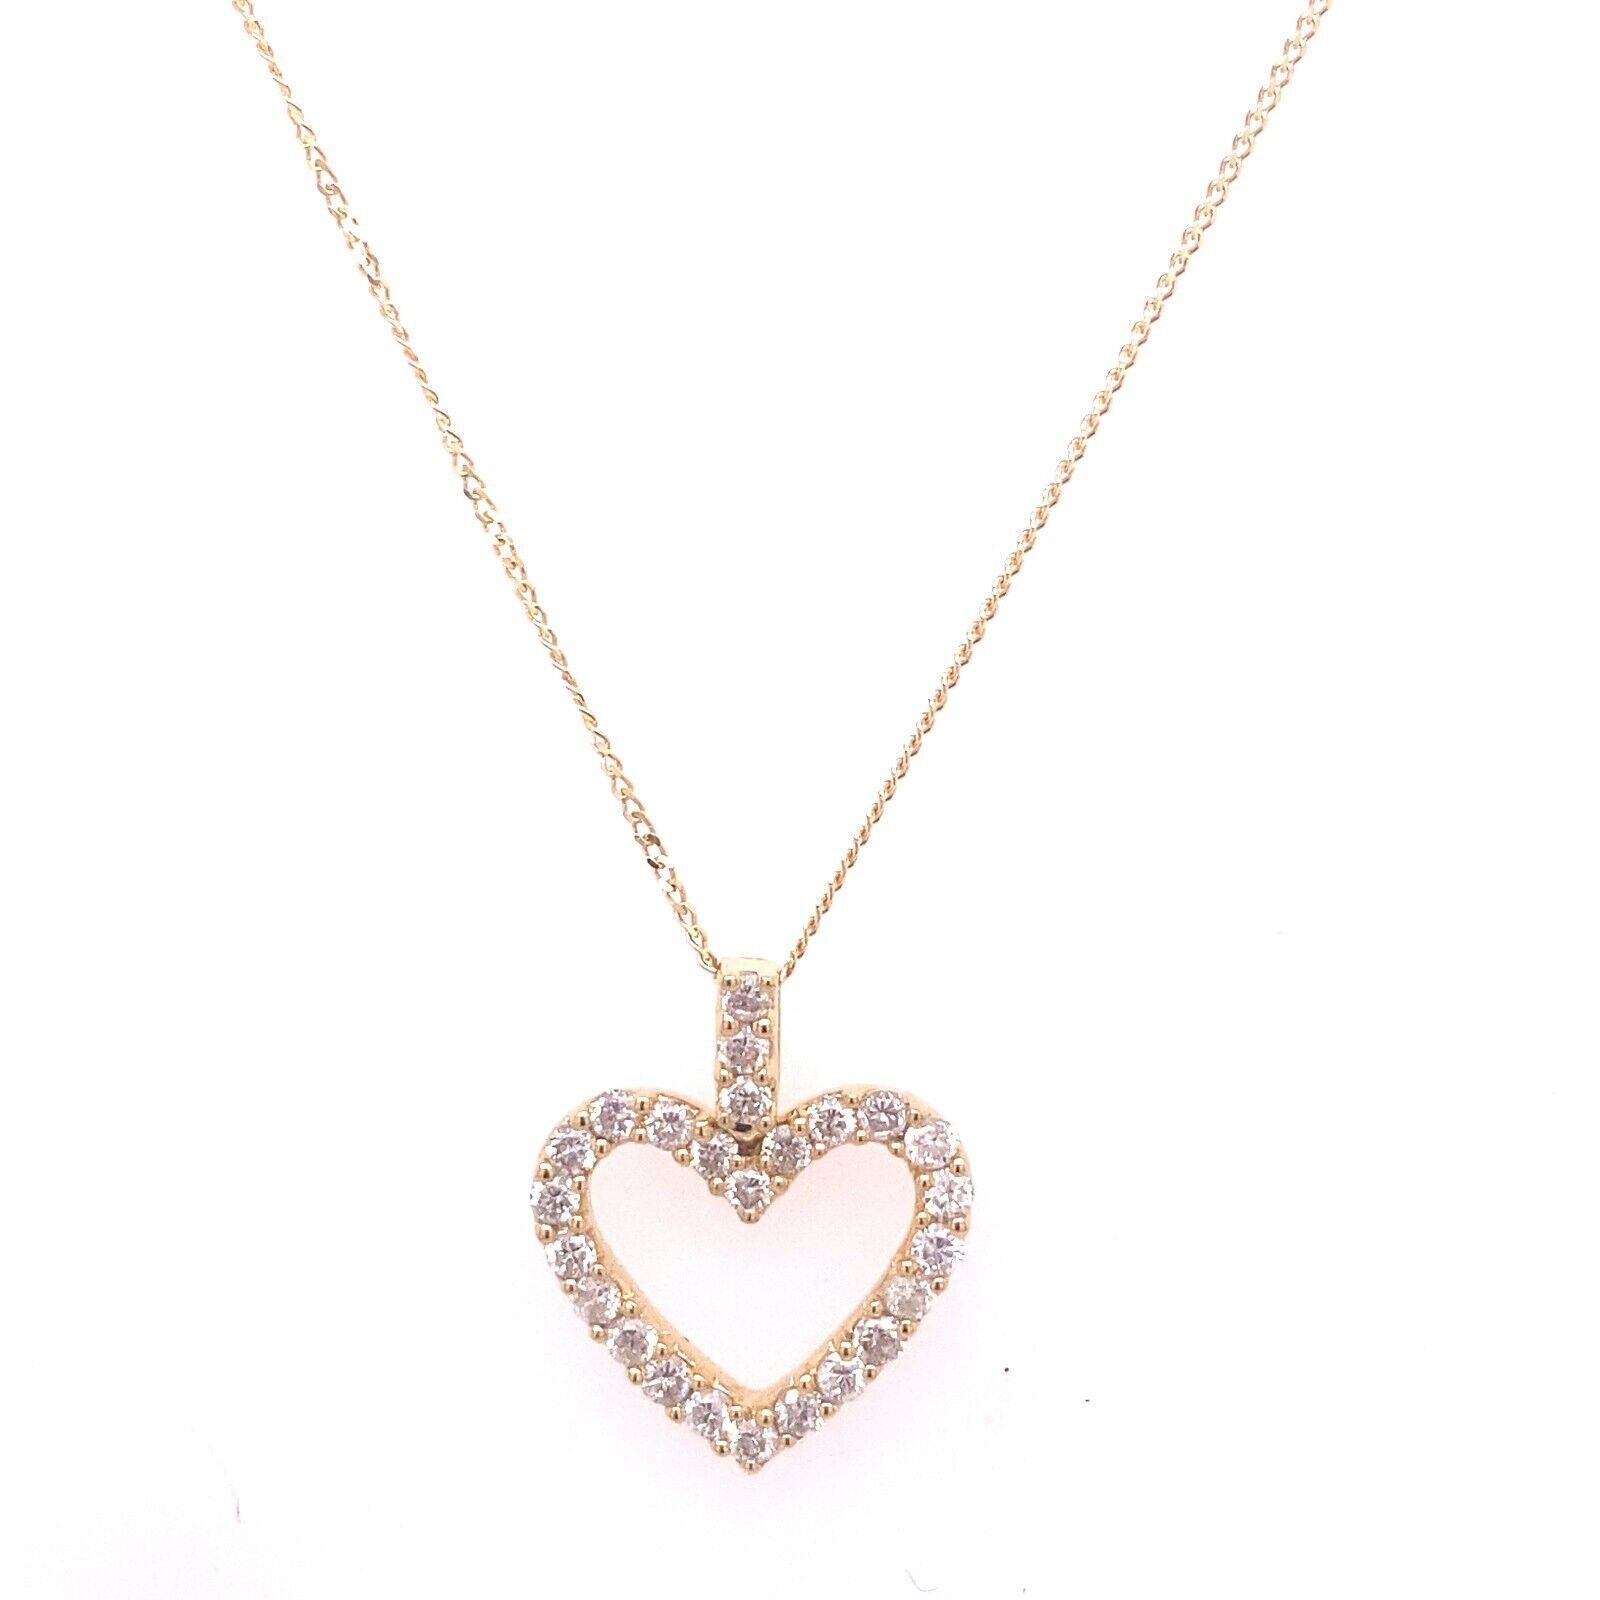 The perfect gift for the one you love, the 18ct yellow gold pendant in a heart shape with a total diamond weight of 0.50ct of round brilliant diamonds. The pendant sits on a 18-inch chain and can be worn with any outfit.

Additional